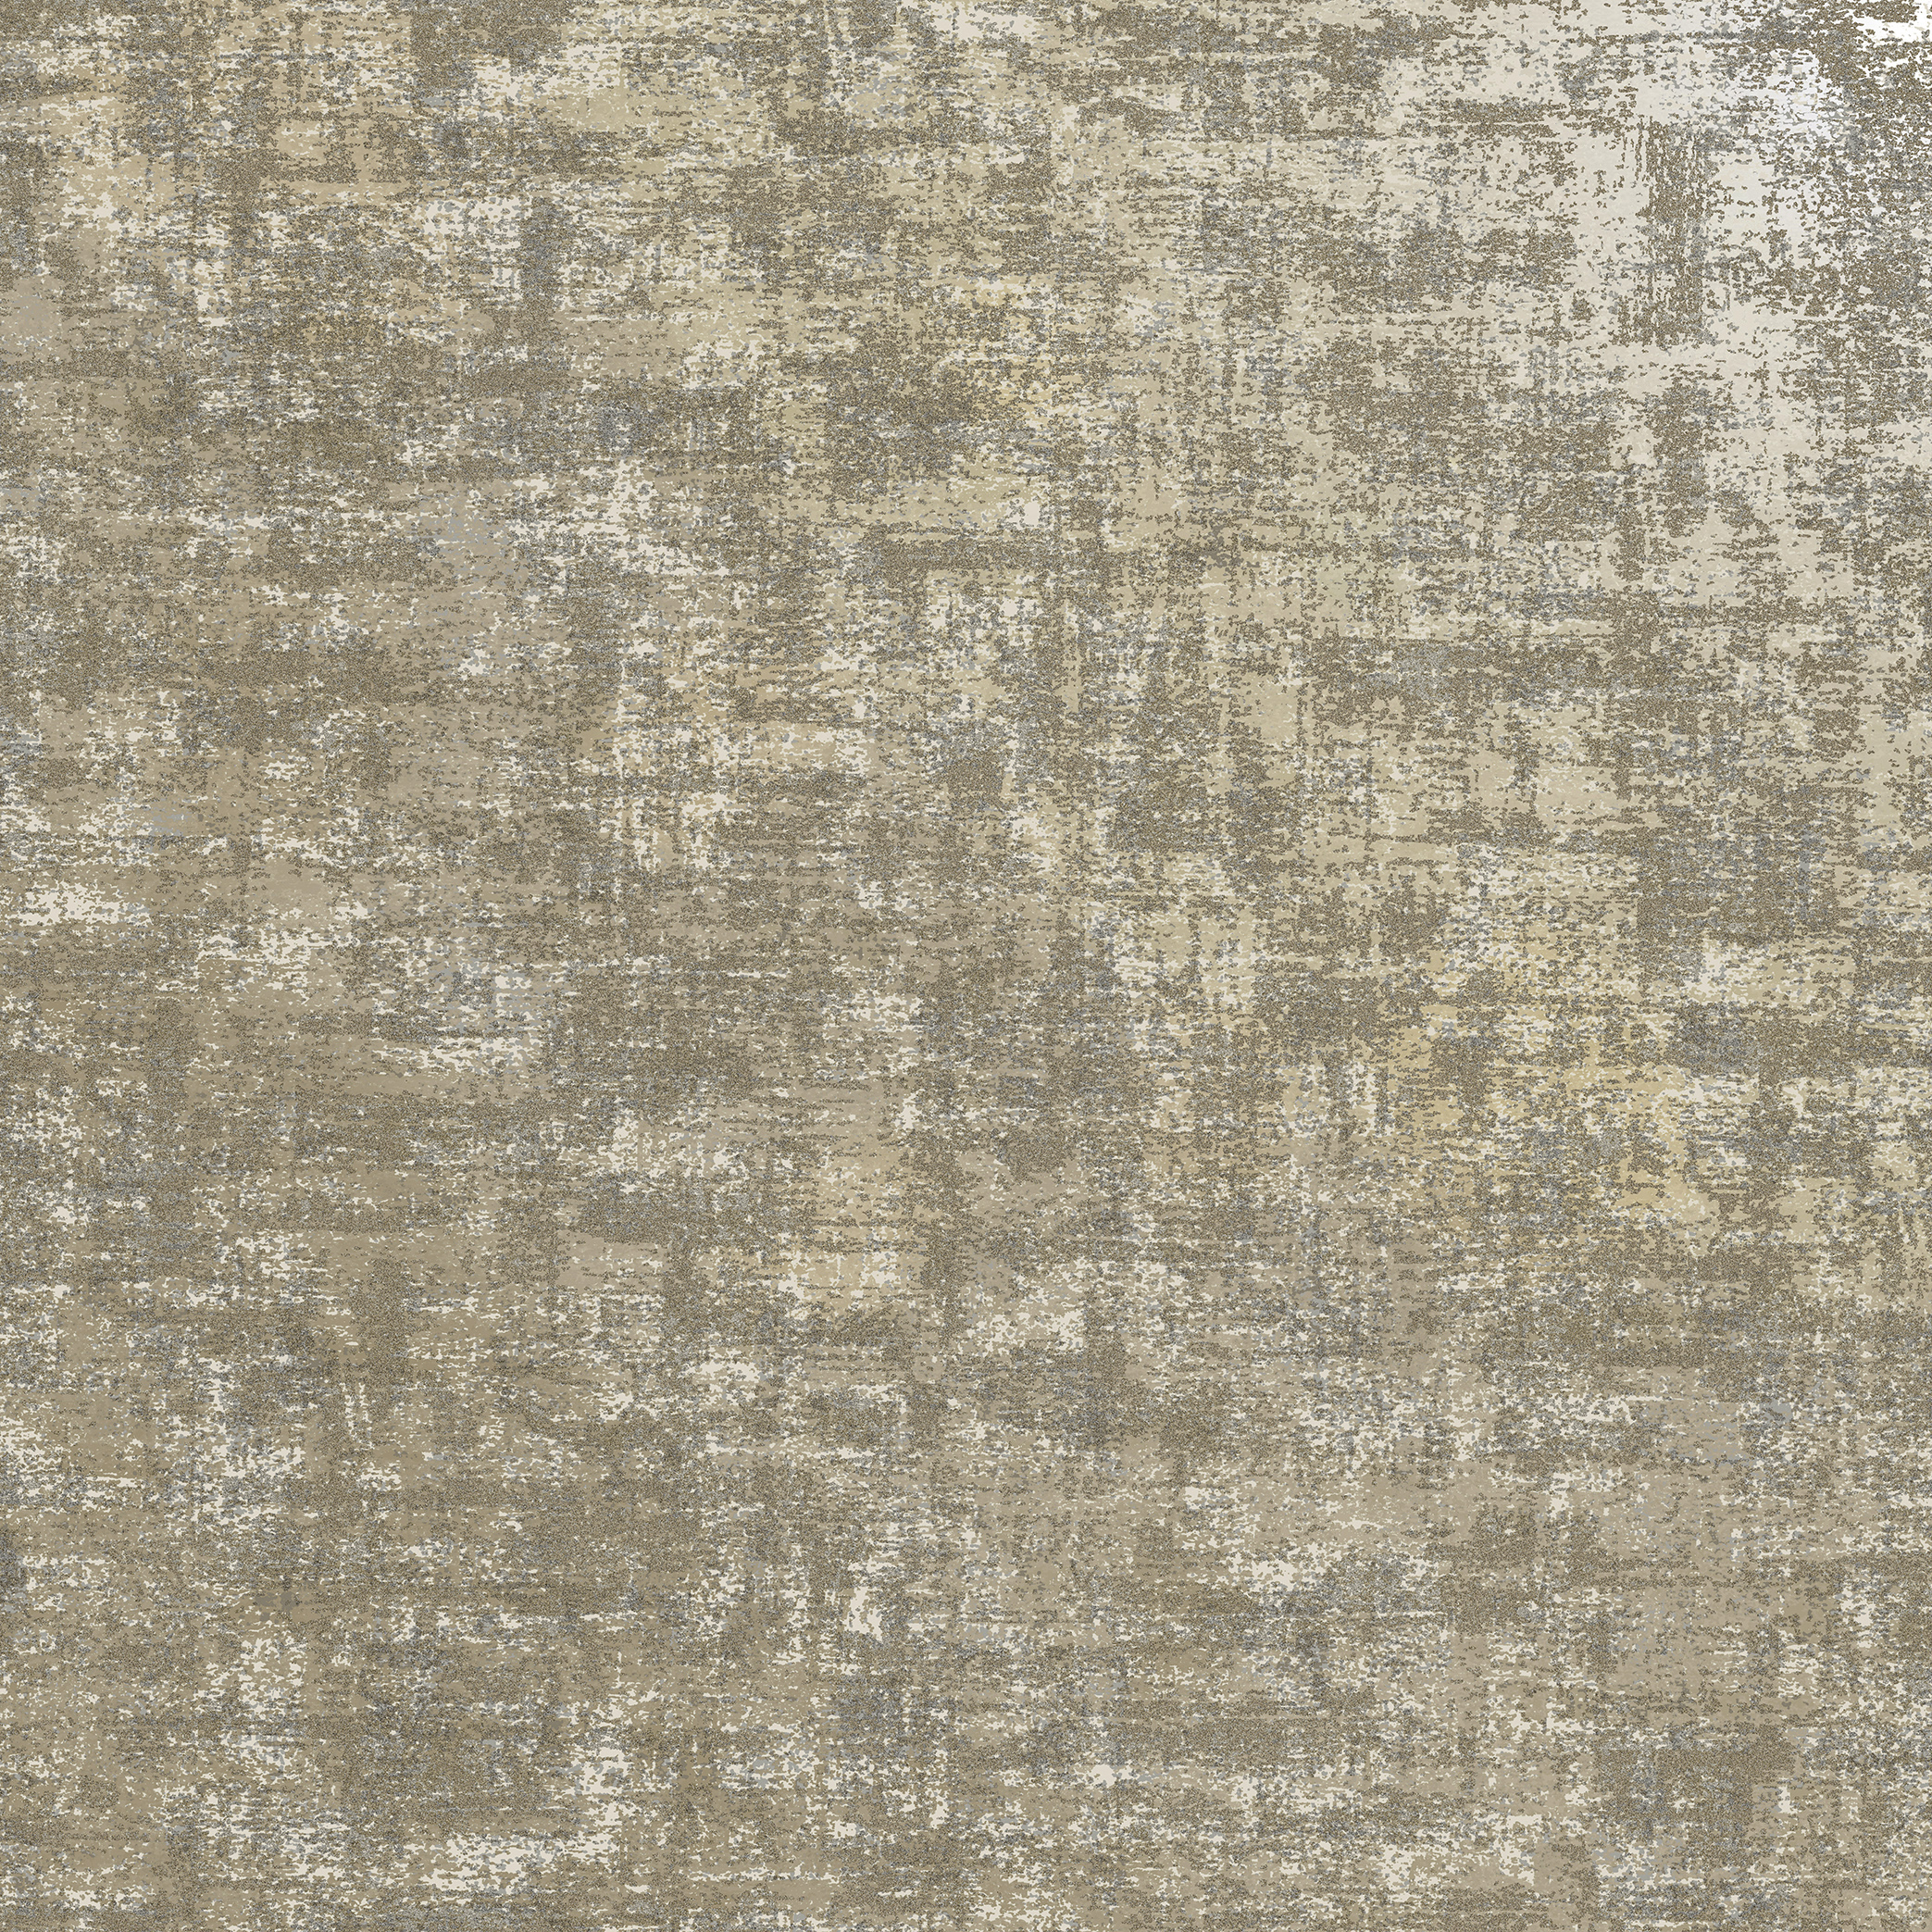 Holden Decor Brindle Bead Texture Taupe & Gold Wallpaper - 10.05m x 53cm